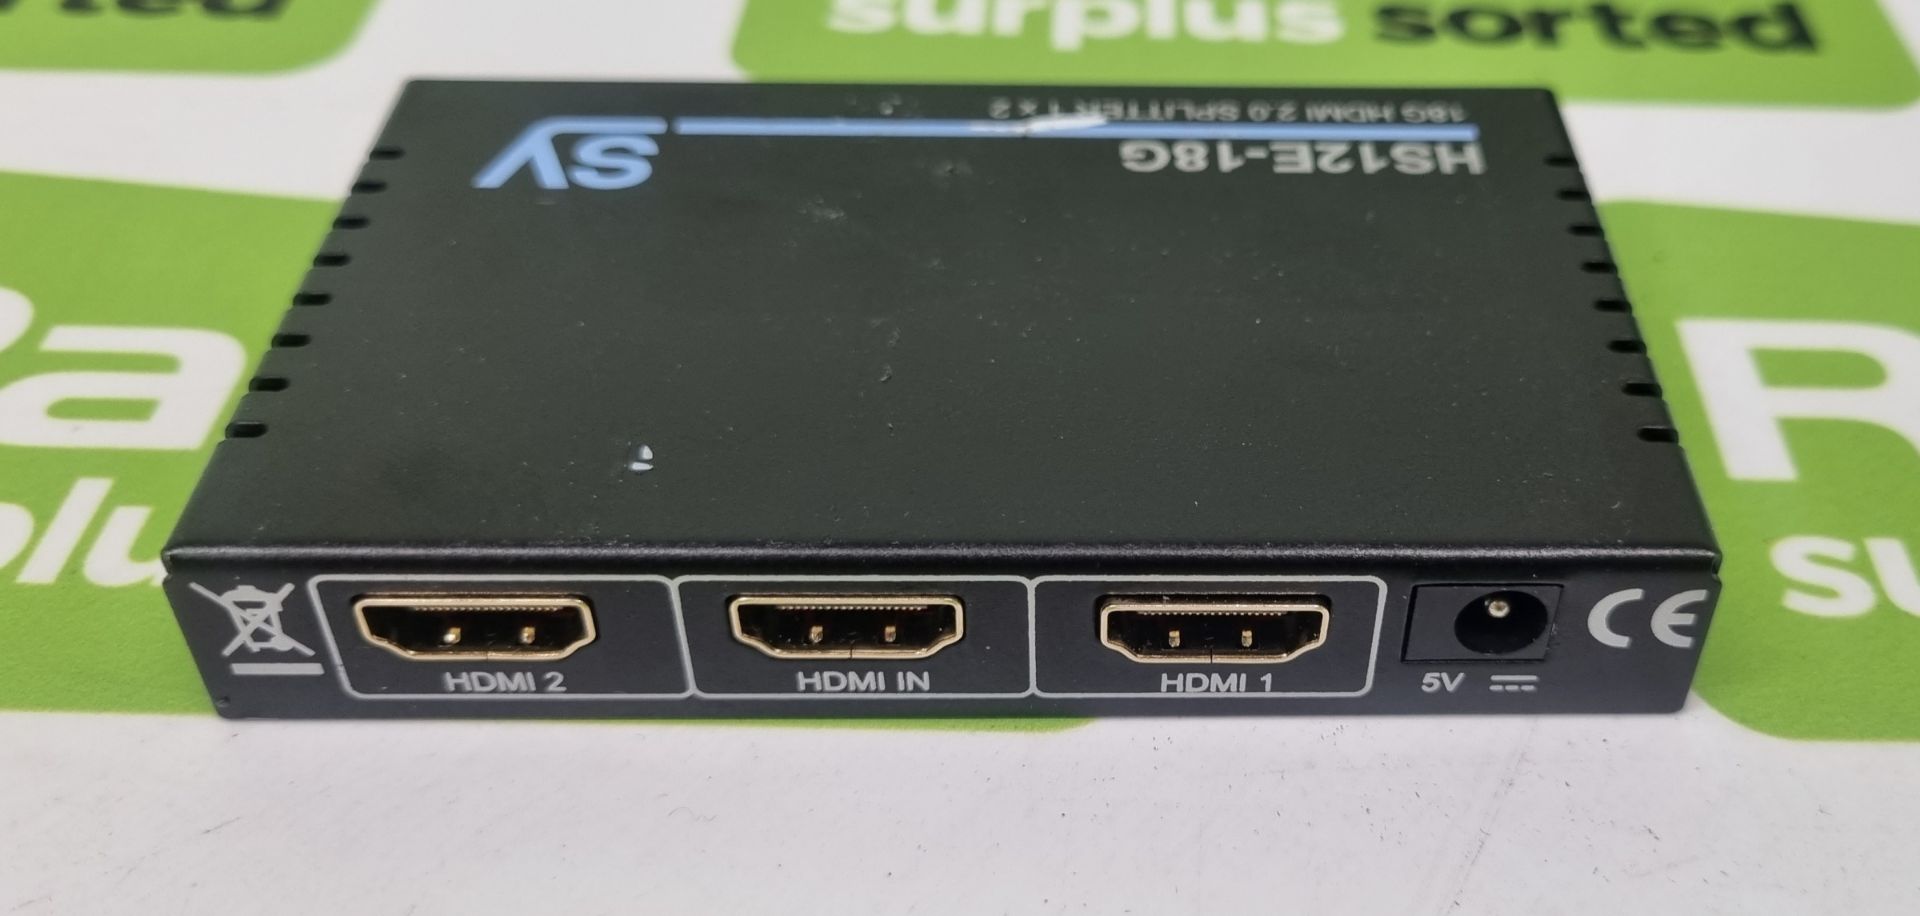 SY-HS12E-18G 1x2 HDMI 2.0 (18Gbps) splitter - Image 7 of 7